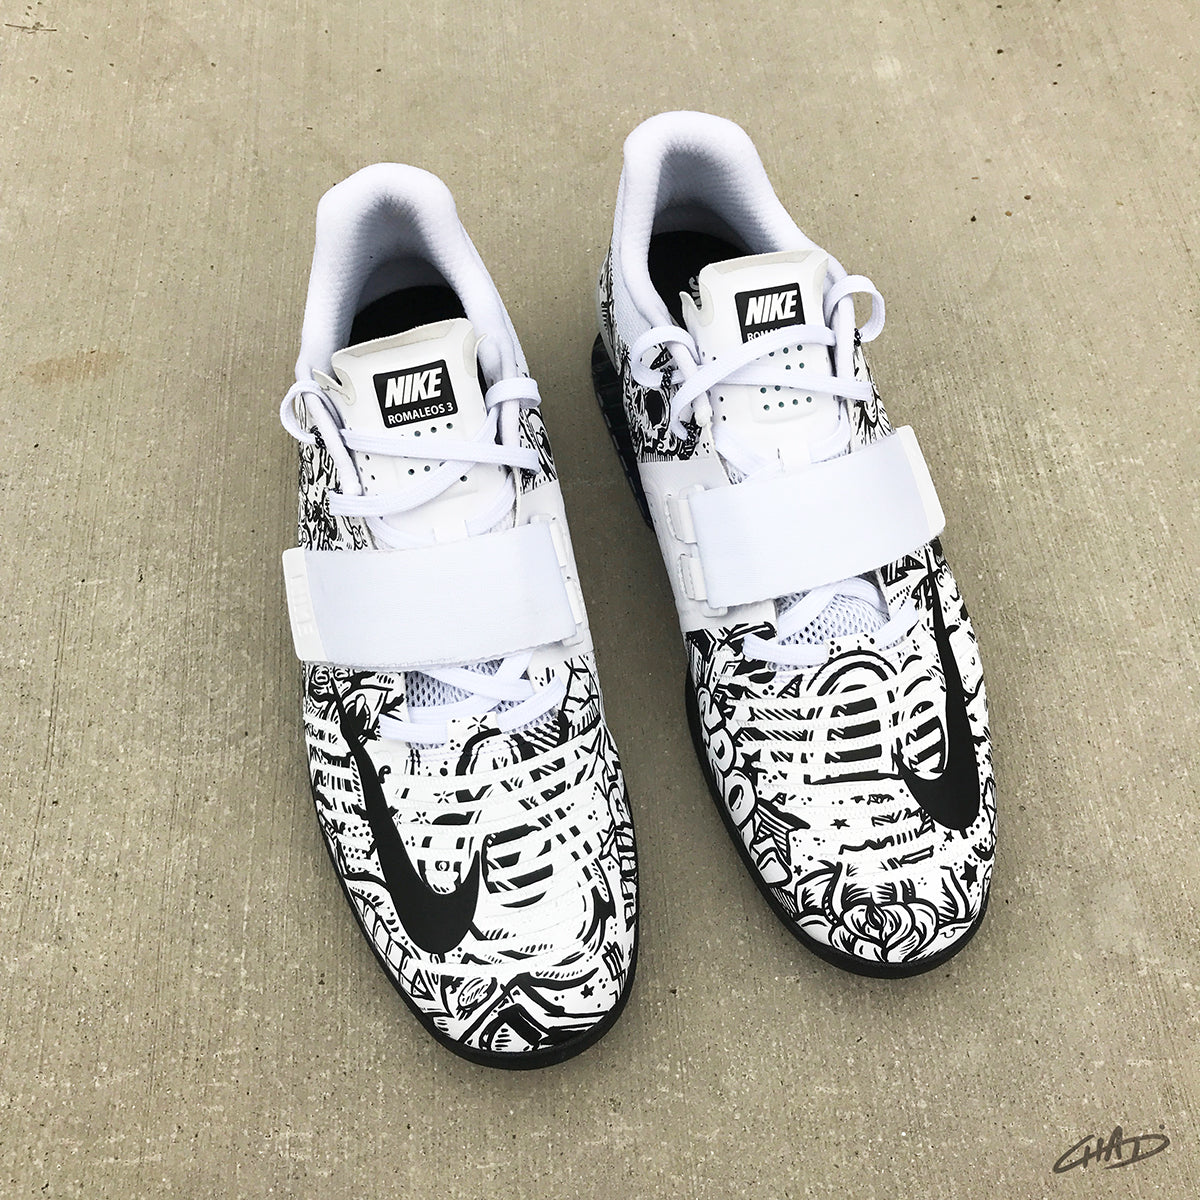 Hand painted Nike Romaleos 3 olympic weightlifting –